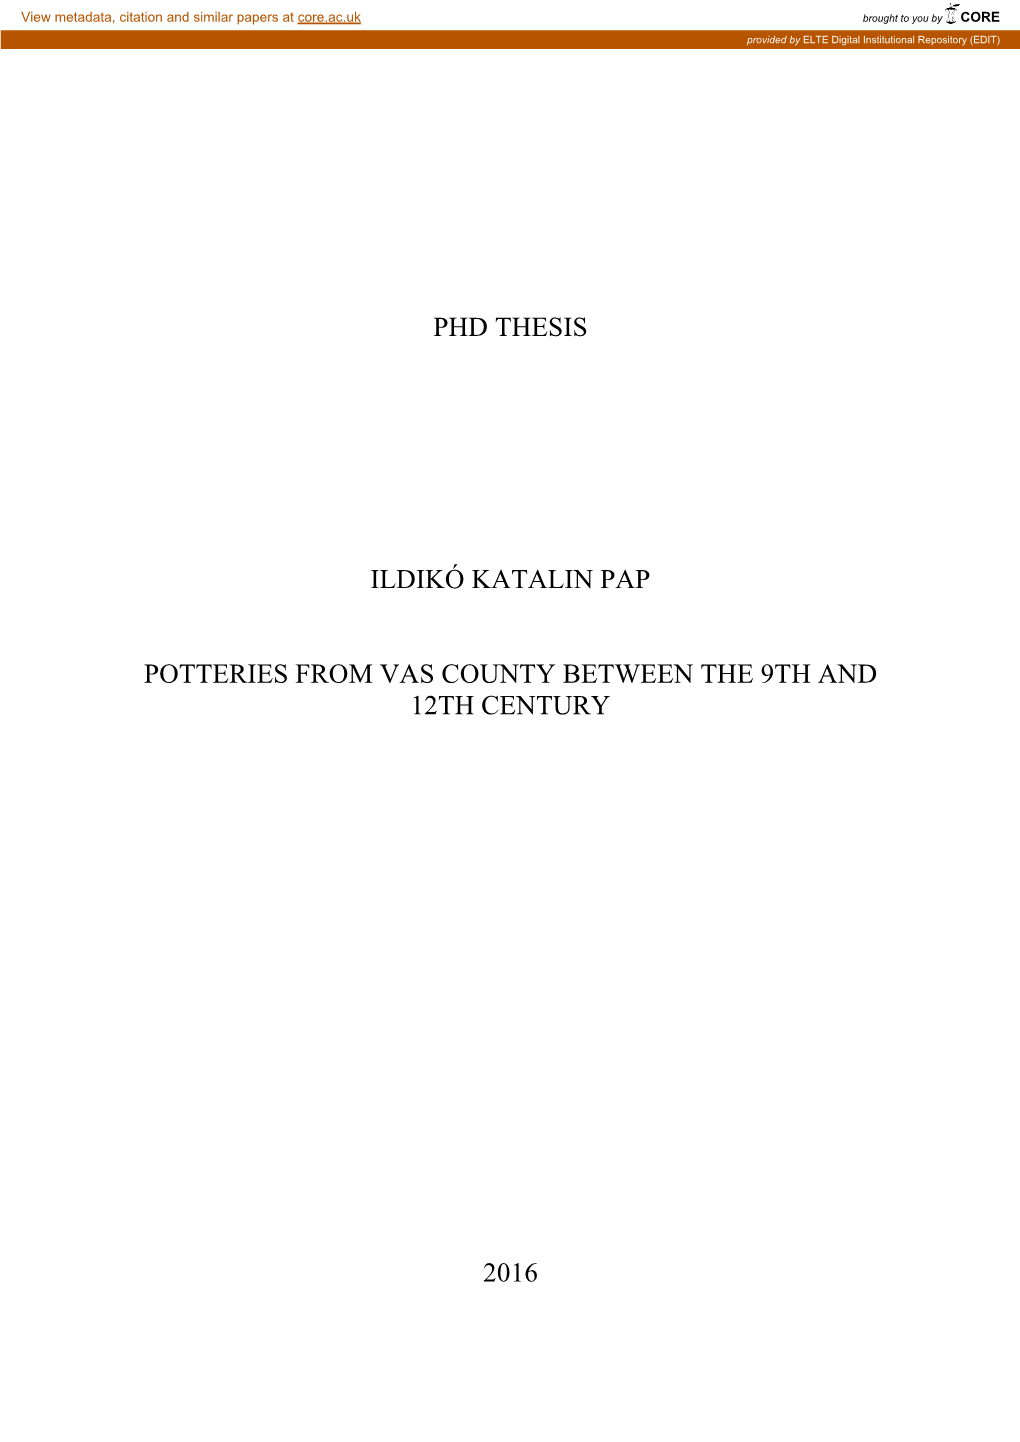 Phd Thesis Ildikó Katalin Pap Potteries from Vas County Between the 9Th and 12Th Century 2016